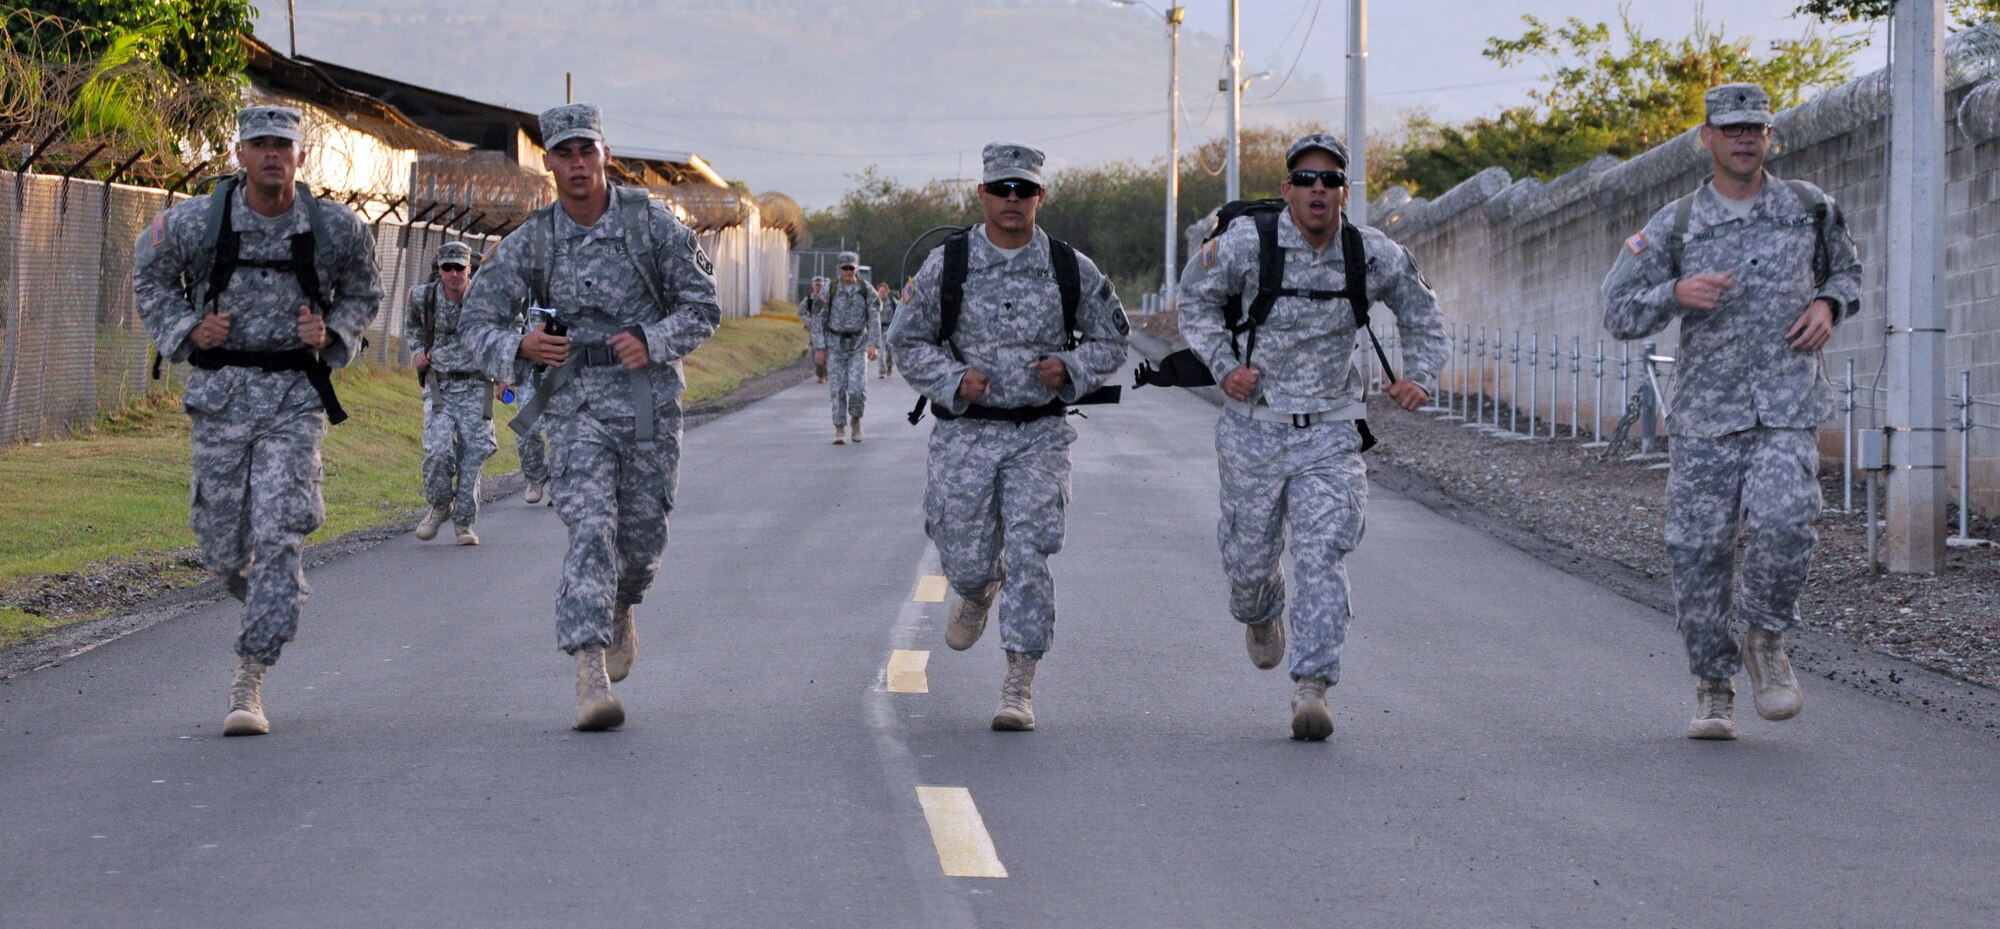 Members of Joint Task Force-Bravo participate in a road march as part of the German Armed Forces Proficiency Badge Qualification test at Soto Cano Air Base, Honduras, Jan. 14, 2014.  Forty members of Joint Task Force-Bravo earned the badge over three days of testing.  (U.S. Air Force photo by Capt. Zach Anderson)